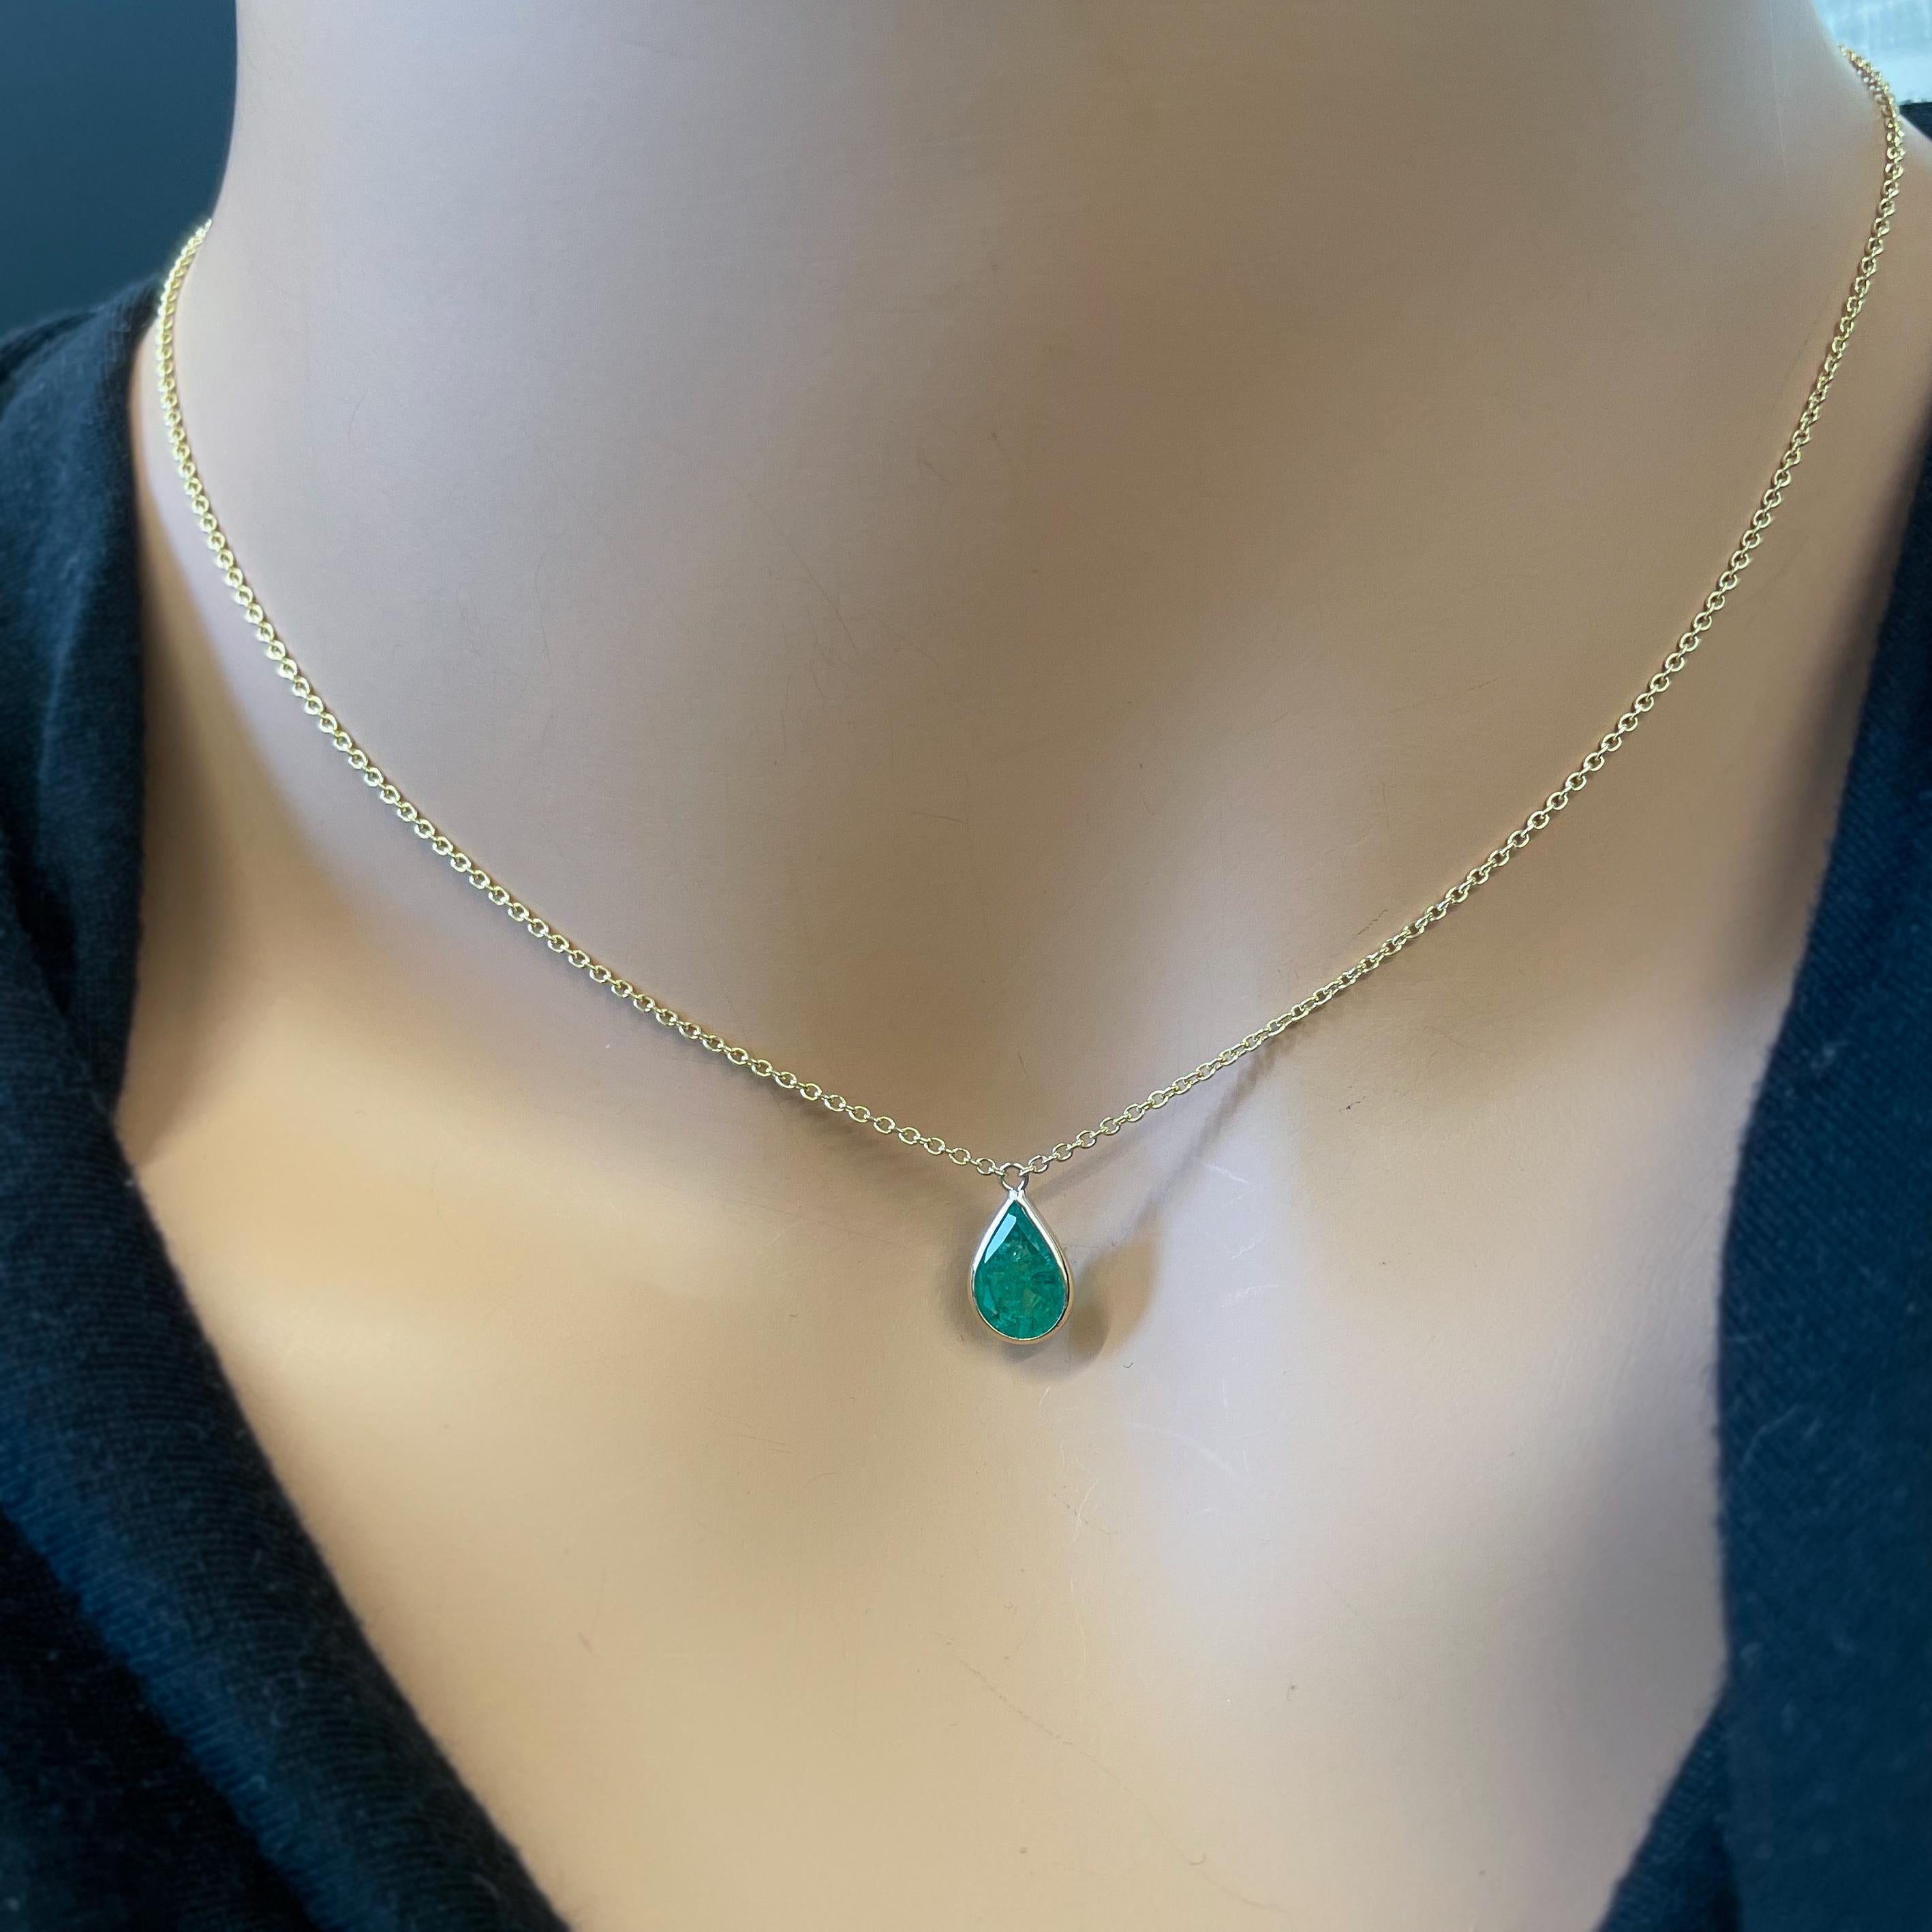 This necklace features a pear-cut green emerald with a weight of 1.34 carats, set in 14k yellow gold (YG). Emeralds are highly prized for their rich green color, and the pear cut, with its distinctive teardrop shape, adds an elegant and unique touch